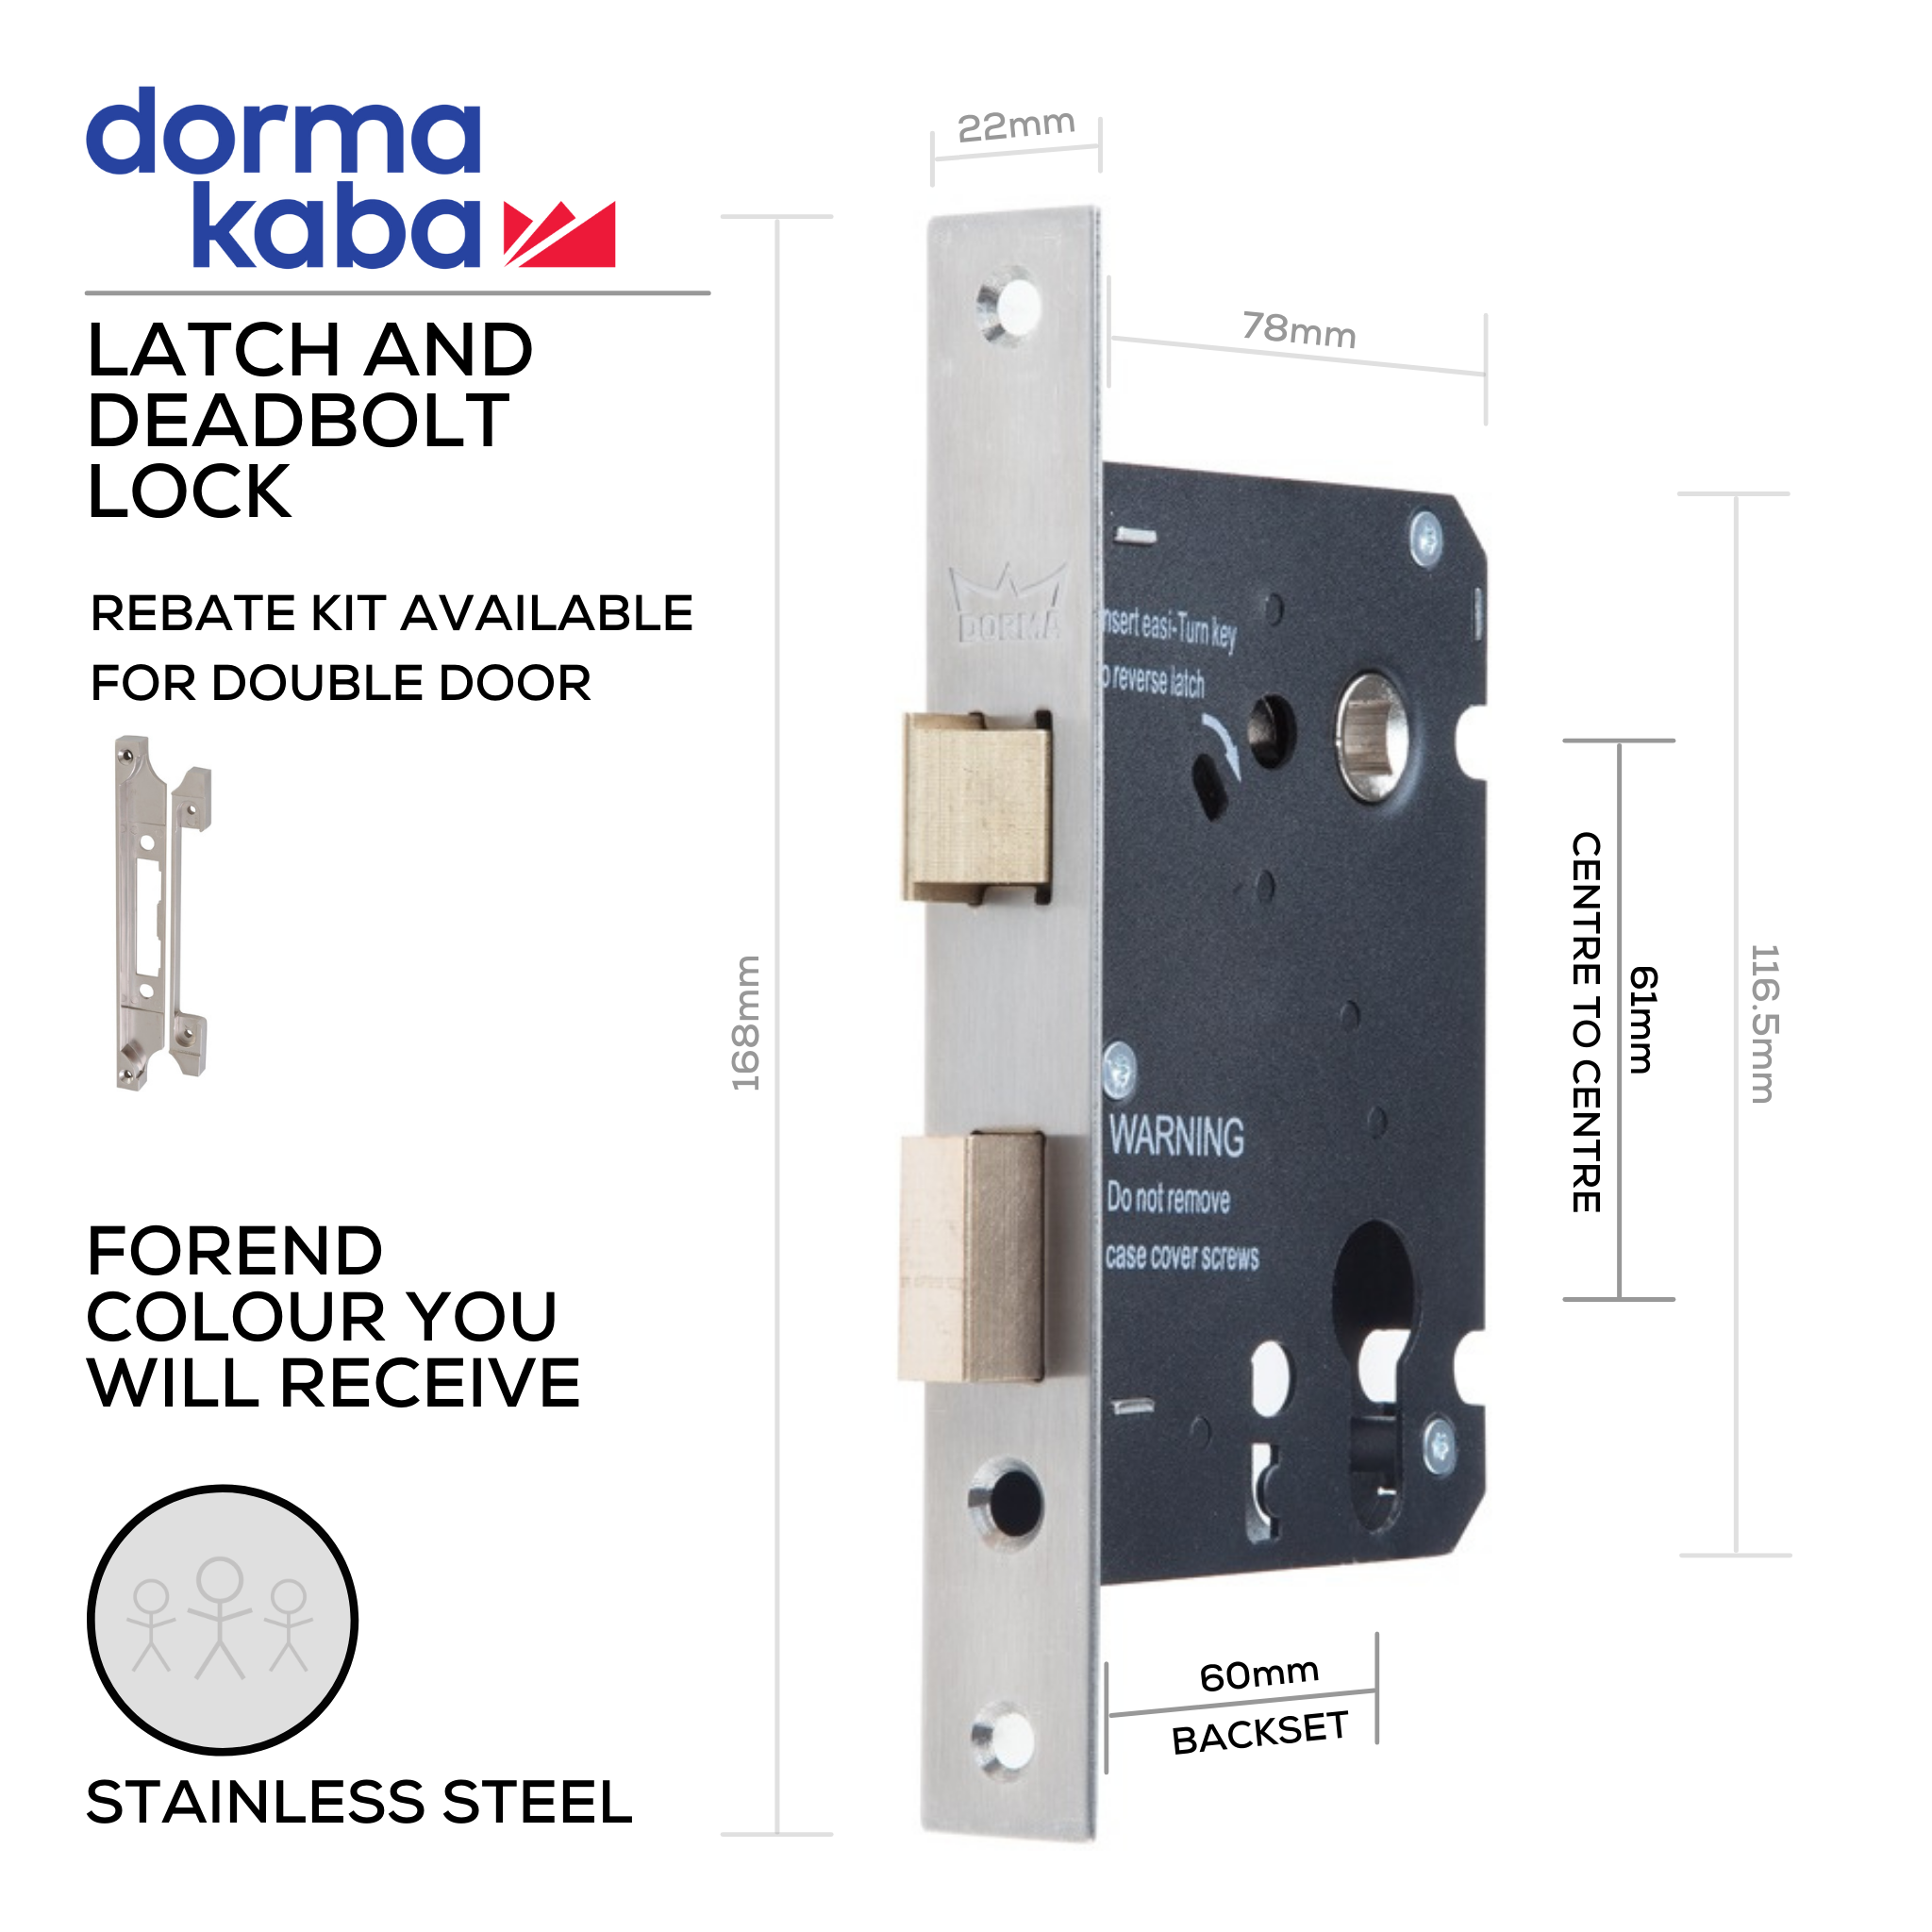 D036S Stainless Steel, Latch & Deadbolt Lock, Euro Cylinder, Excluding Cylinder, 57mm (Backset) x 61mm (ctc), Stainless Steel, DORMAKABA